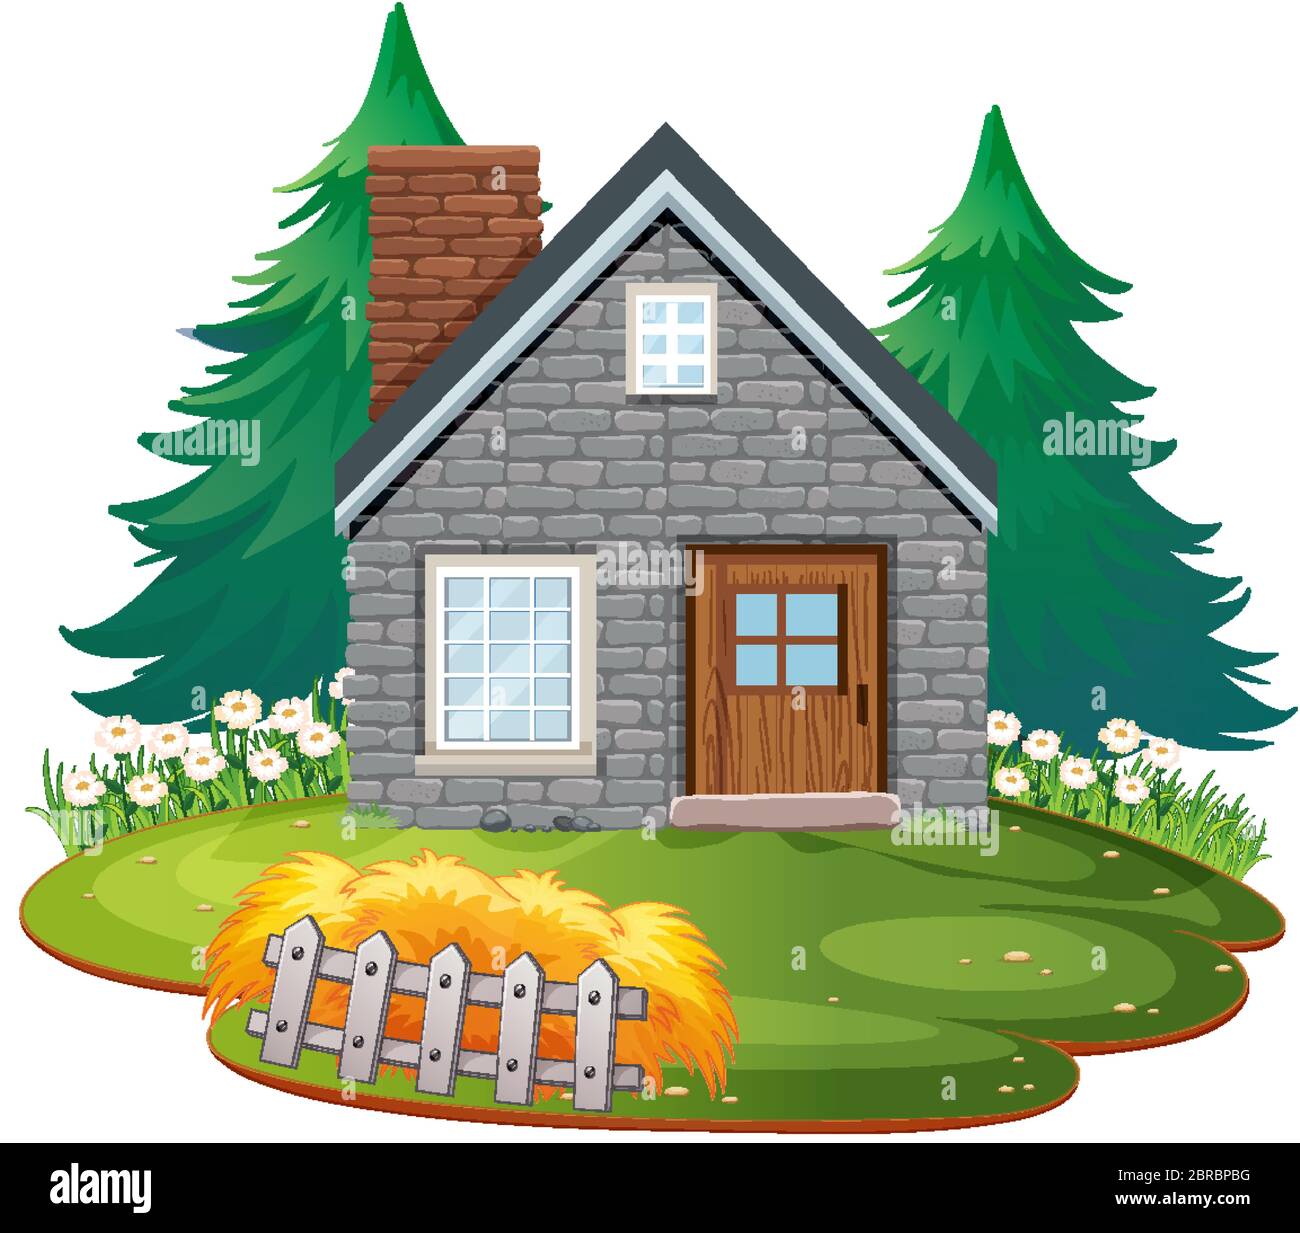 Isolated traditional stone house illustration Stock Vector